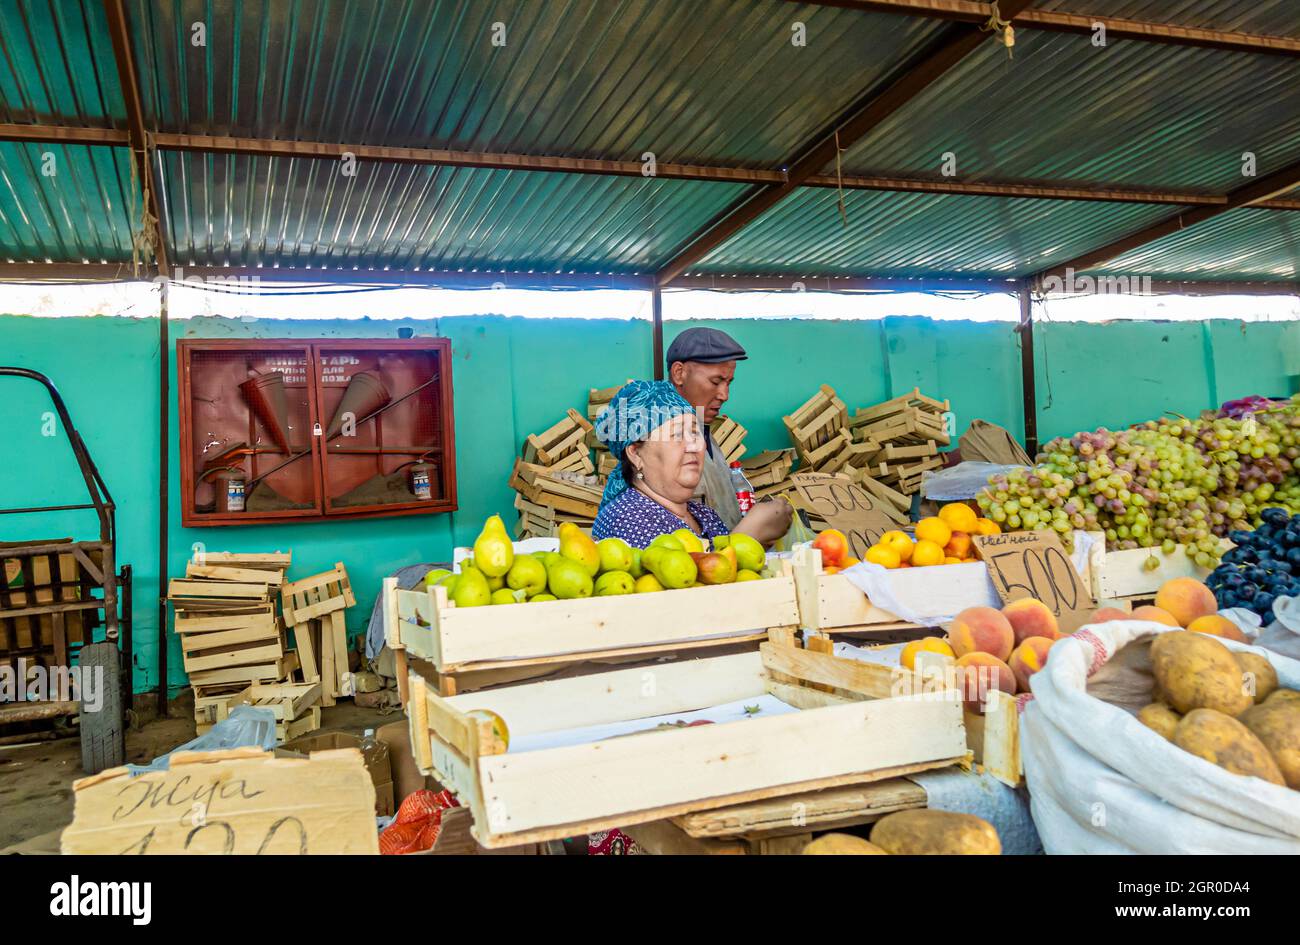 Woman selling pears at the fruit stall on streetmarket bazar bazaar in Kyzyl-Orda, Kazakhstan, Central Asia Stock Photo